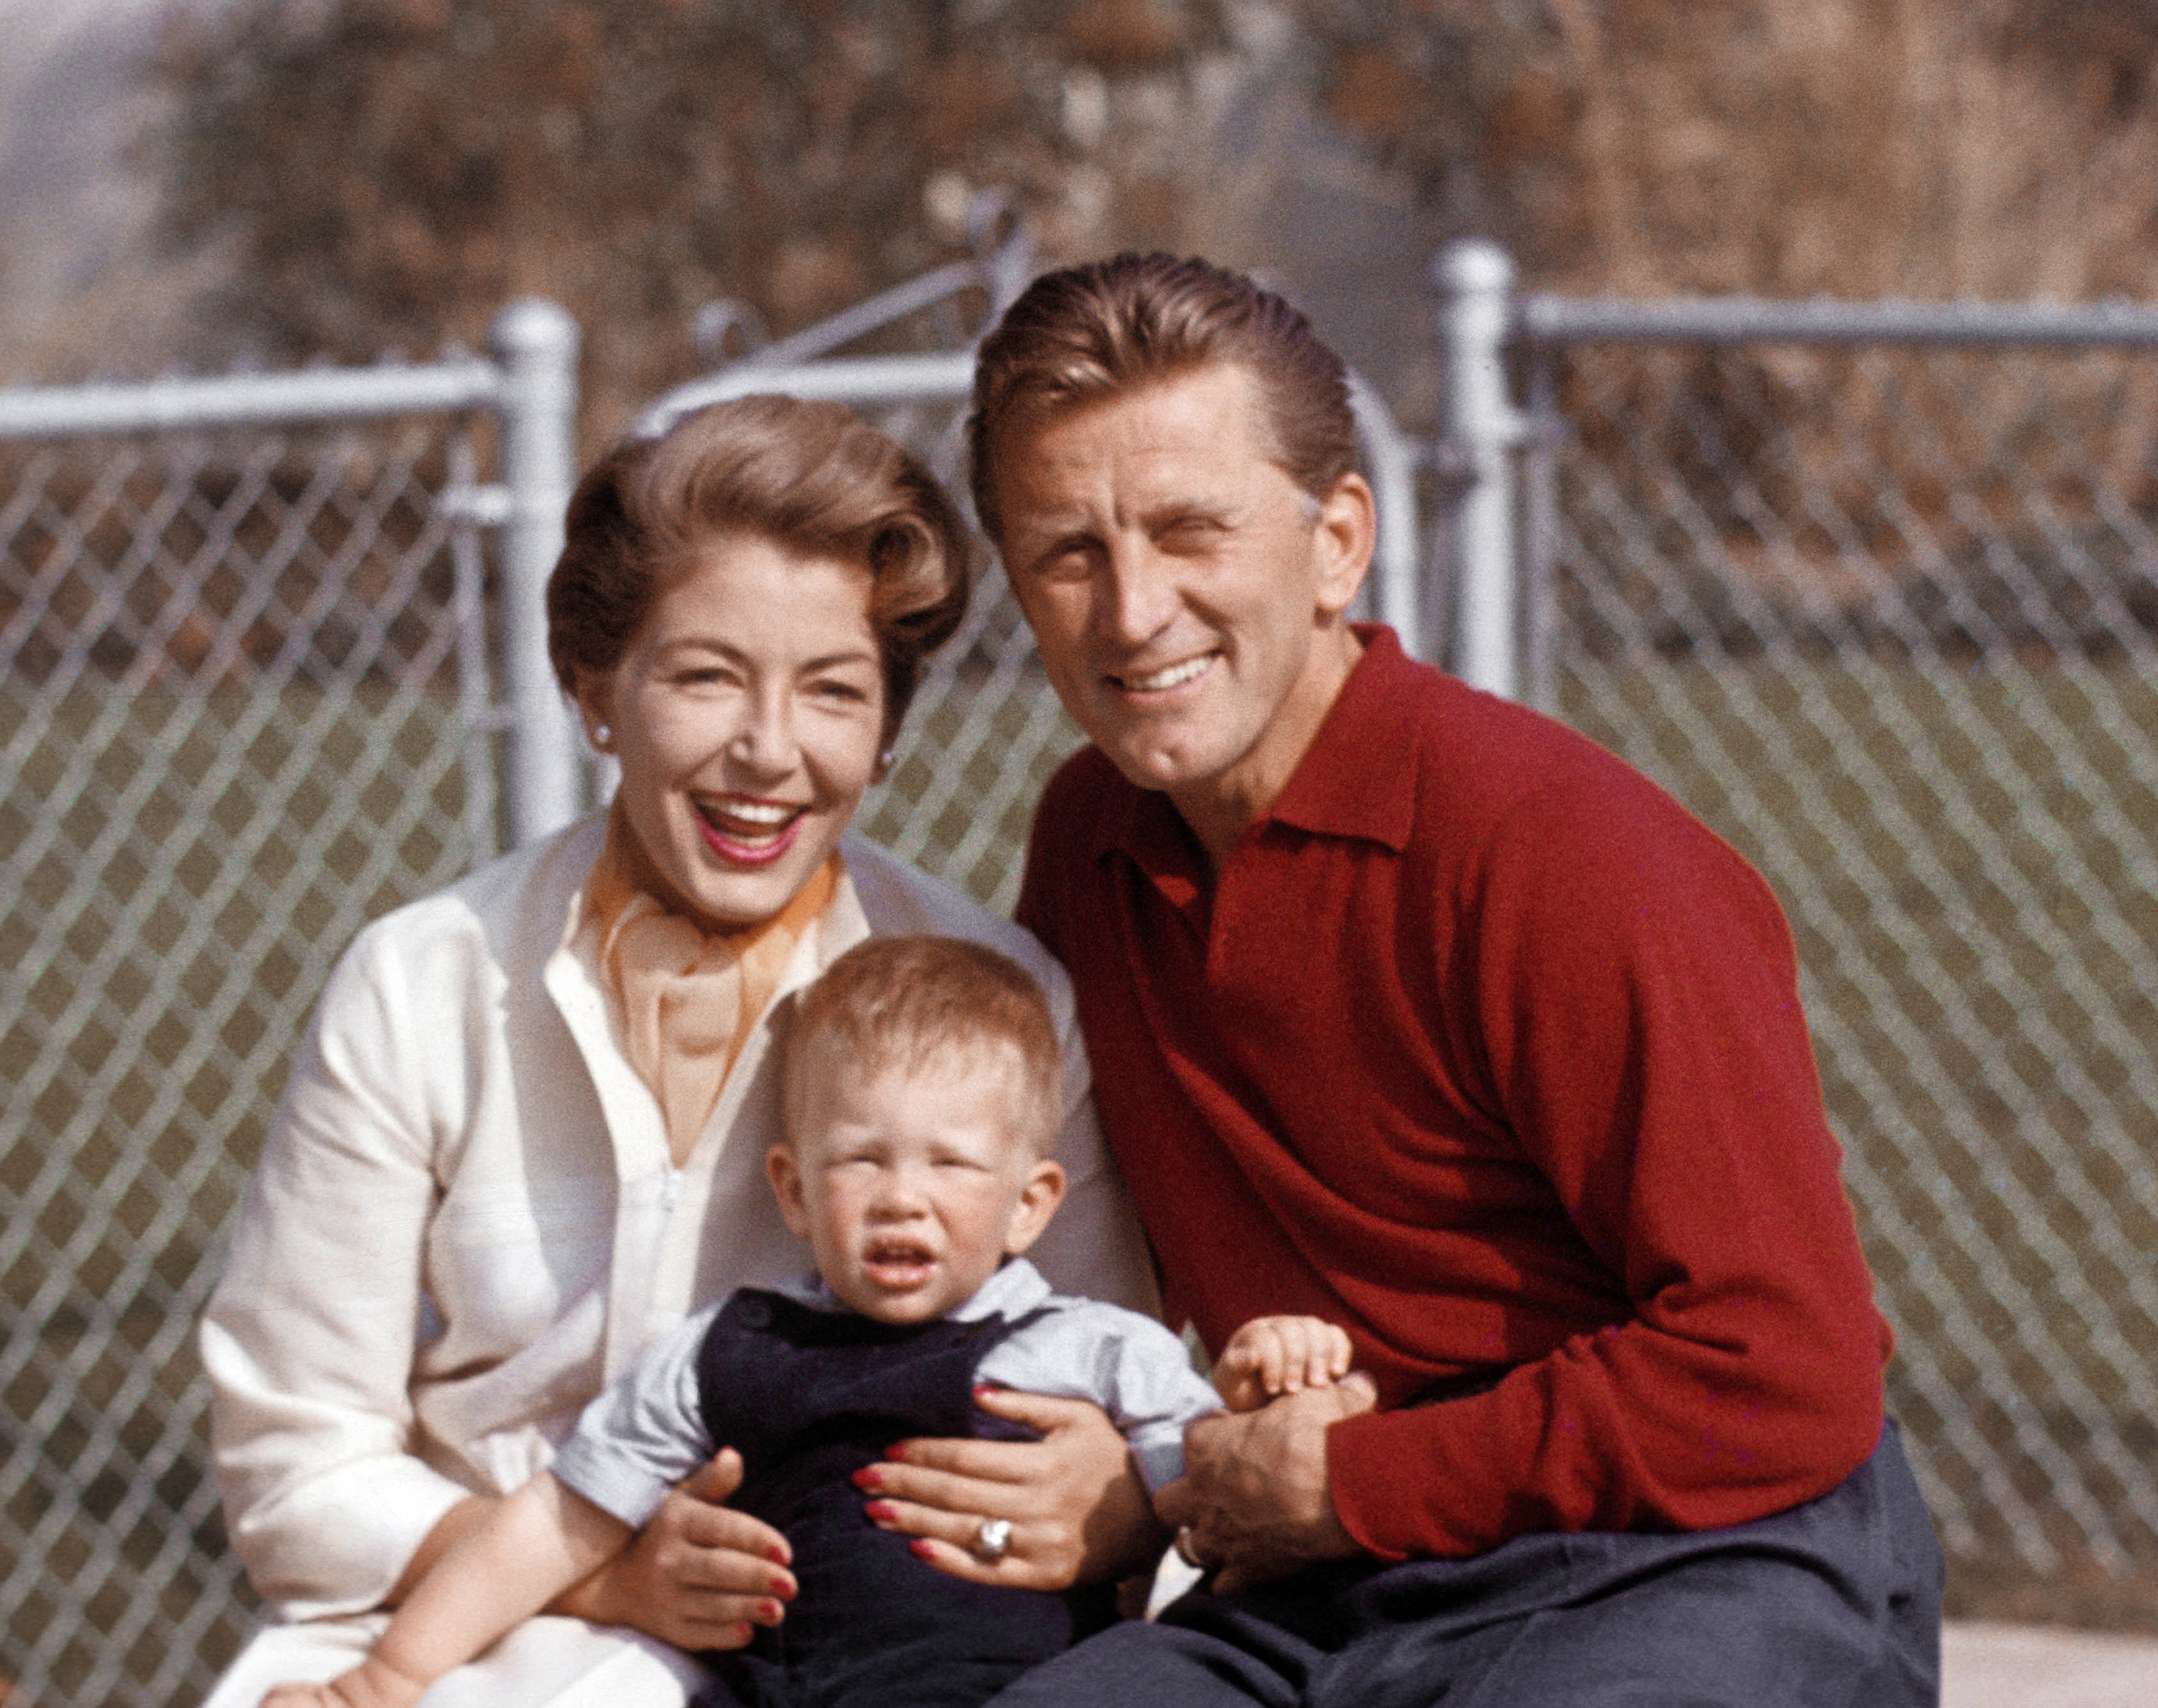 Kirk Douglas, Anne Buydens and their son Peter Douglas in Los Angeles 1957. | Source: Getty Images